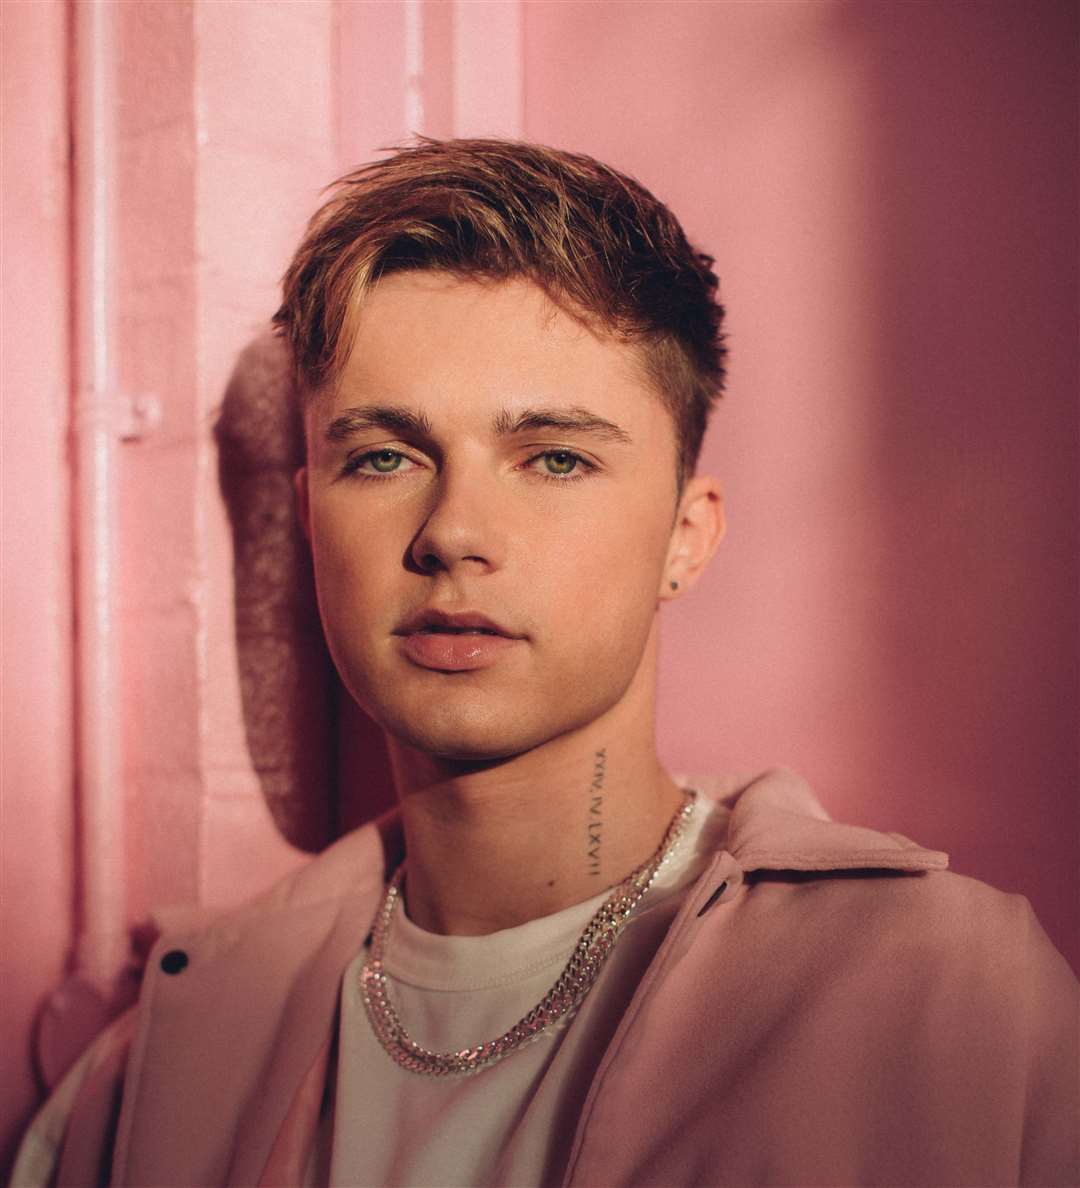 Kent-based pop star HRVY is set to open the National Television Awards 2021. Photo: MBC PR